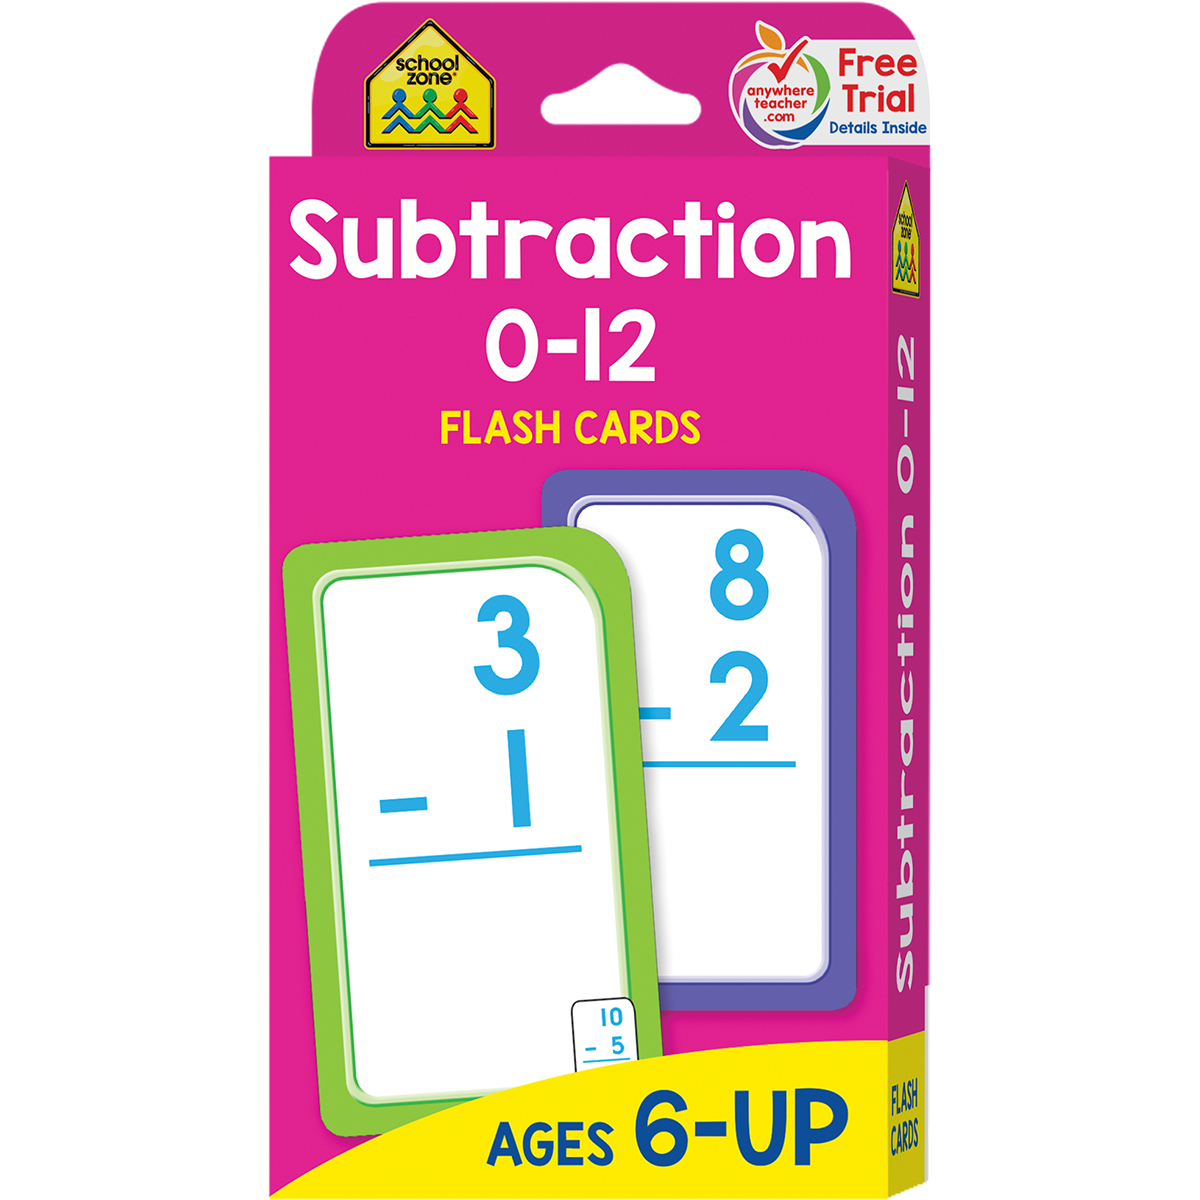 Flash Card: Subtraction 0-12 Flash Cards (Other) - Walmart